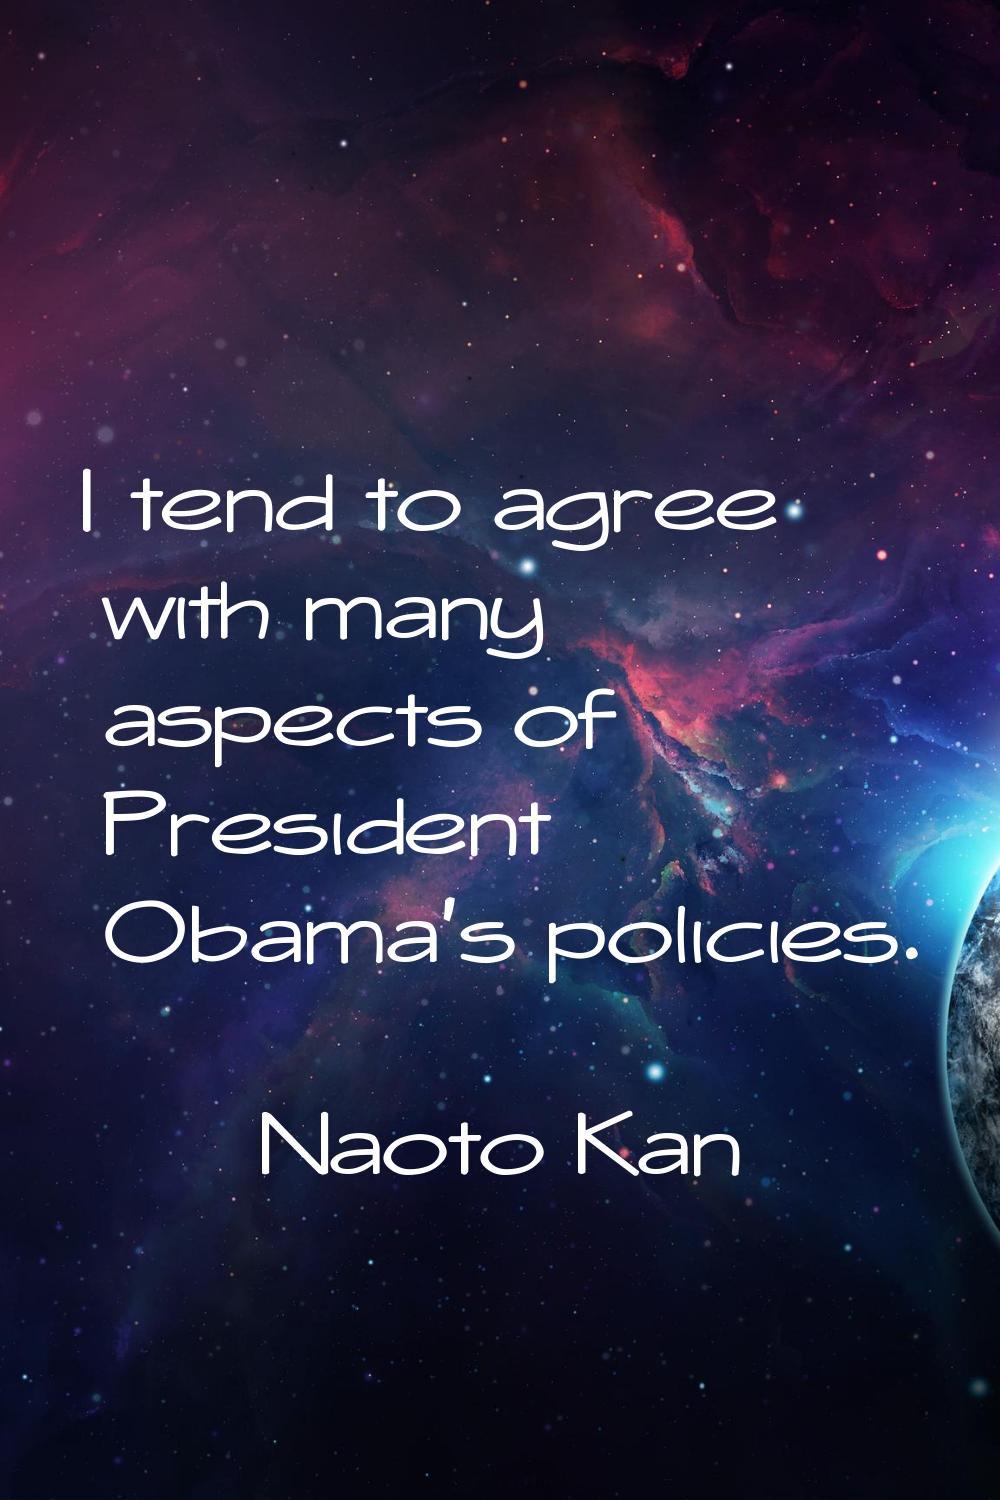 I tend to agree with many aspects of President Obama's policies.